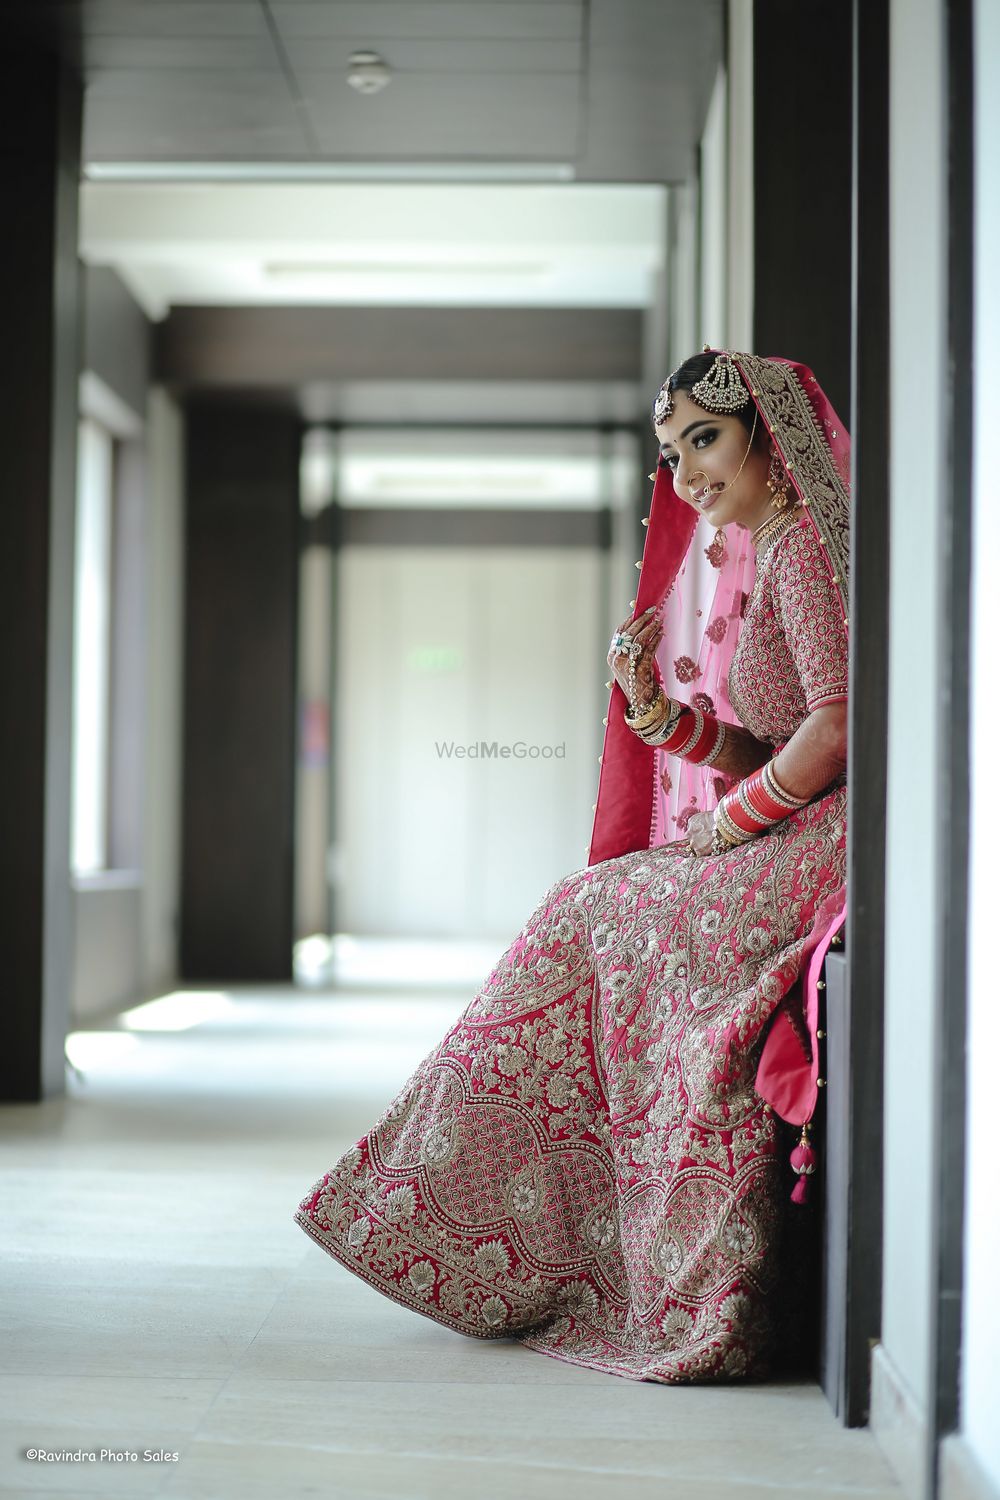 Photo From Maneet & Hargun - By Ravindra Photo Sales